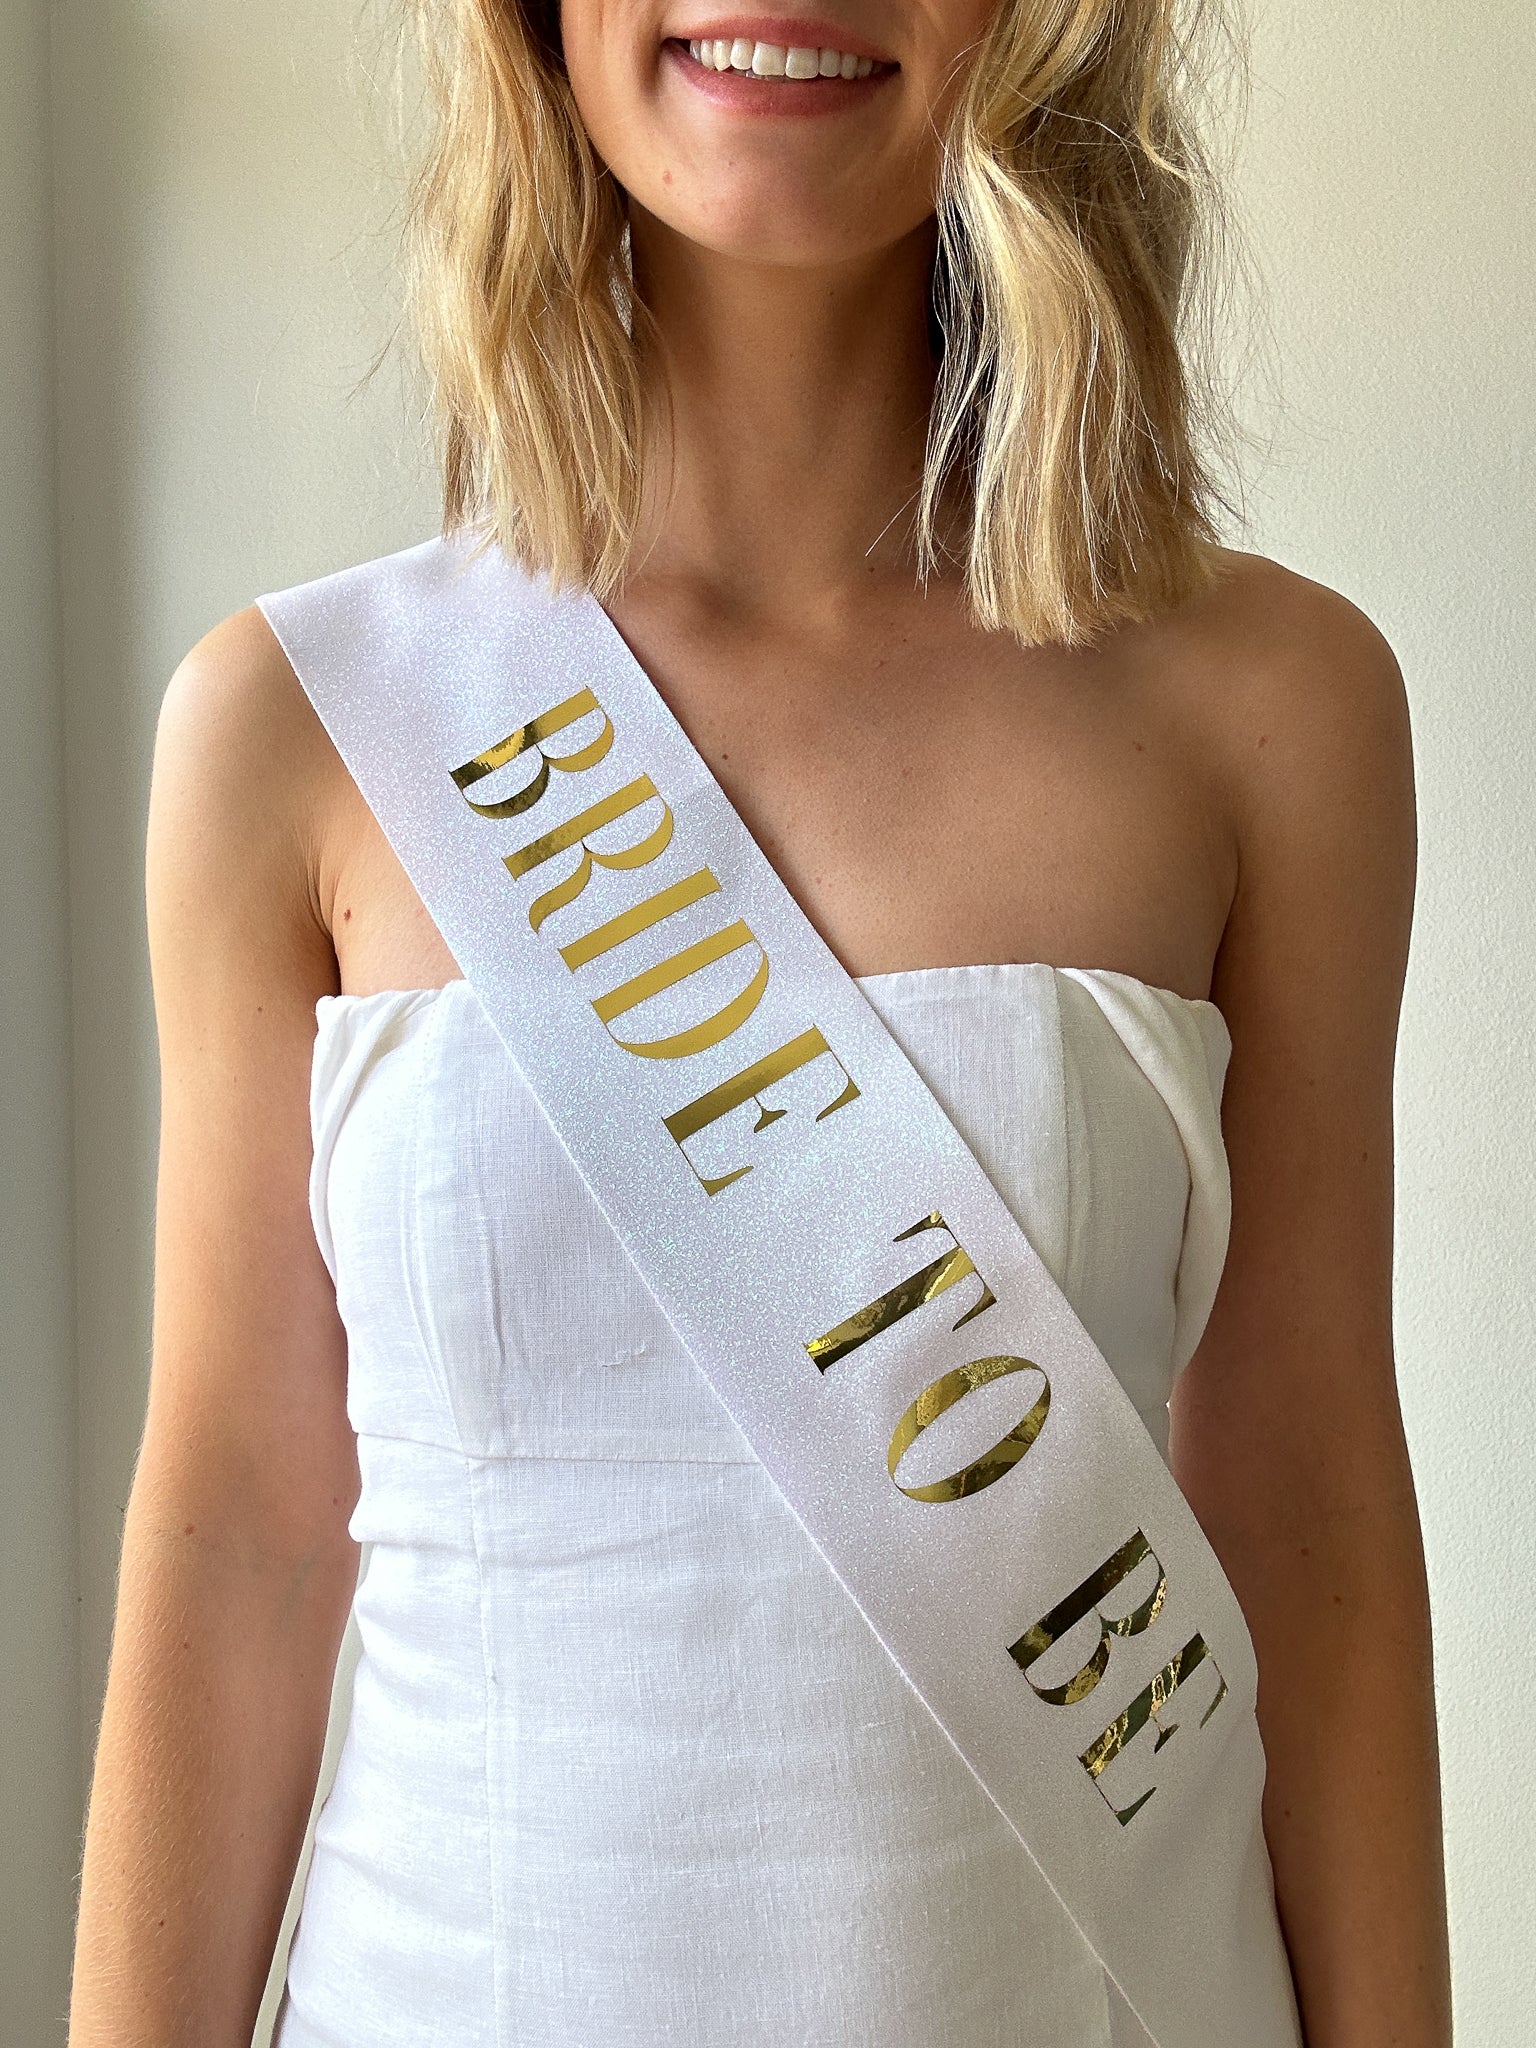 Model wearing white and gold bride to be sash